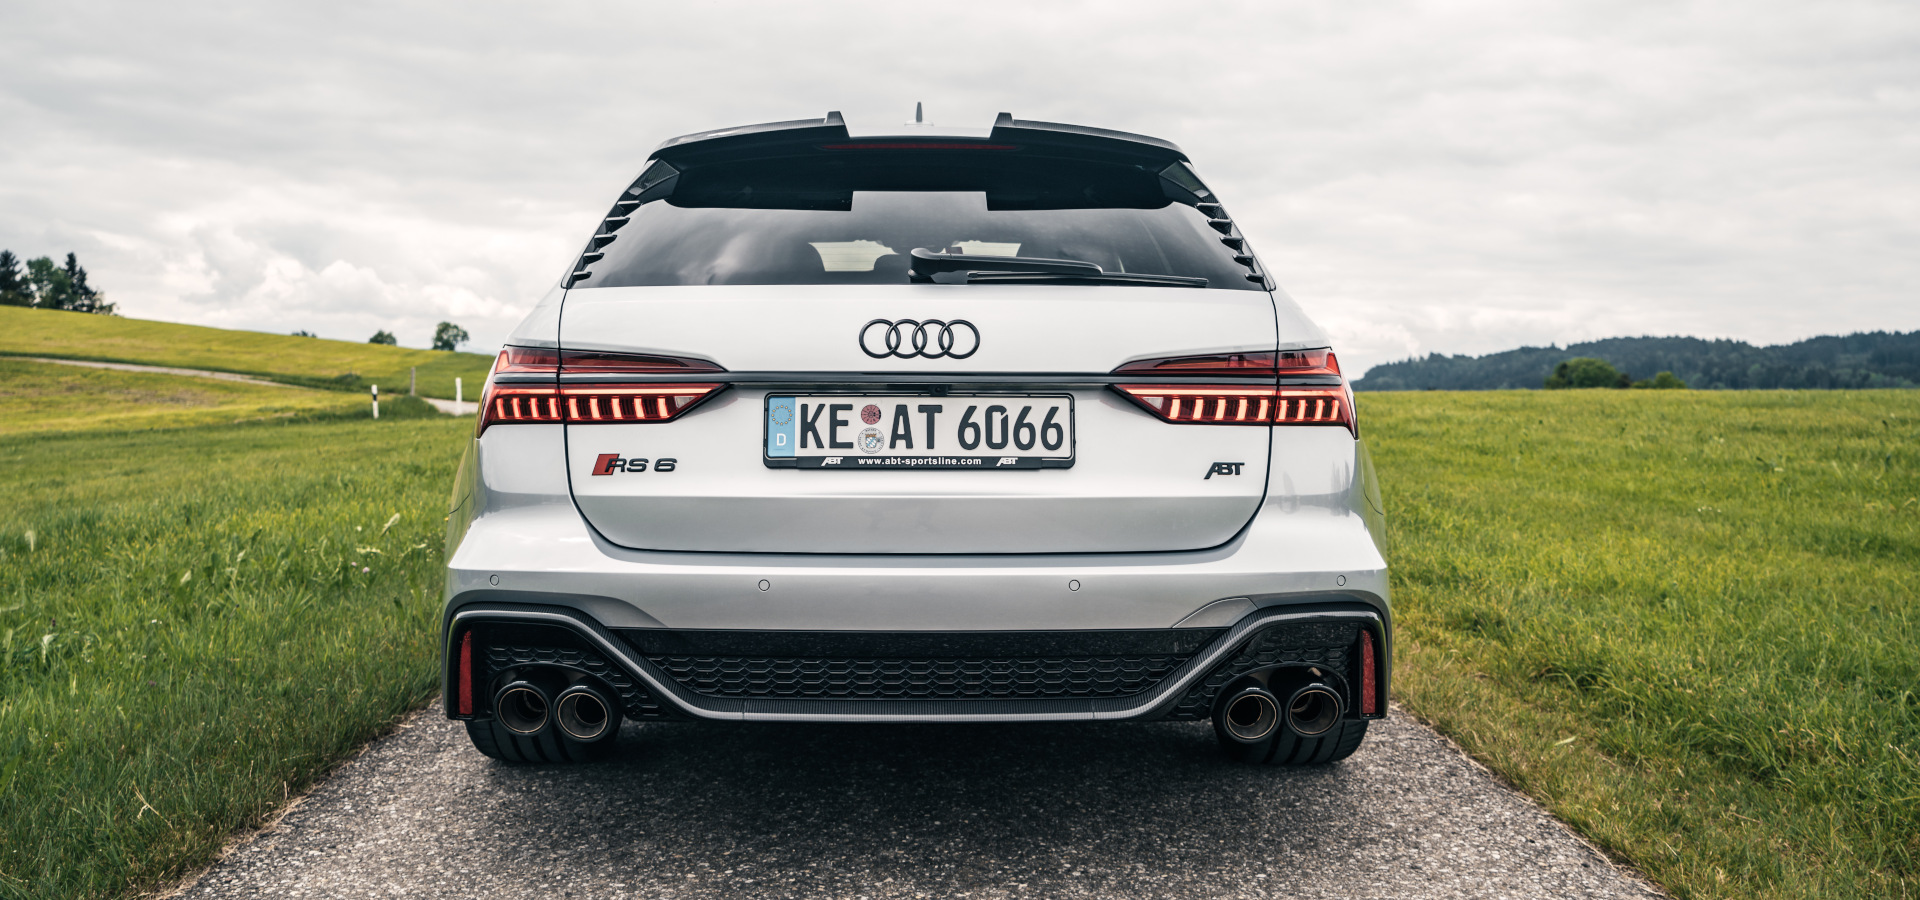 ABT Sportsline Upgraded and Audi's RS6 Avant With Extra Horsepower